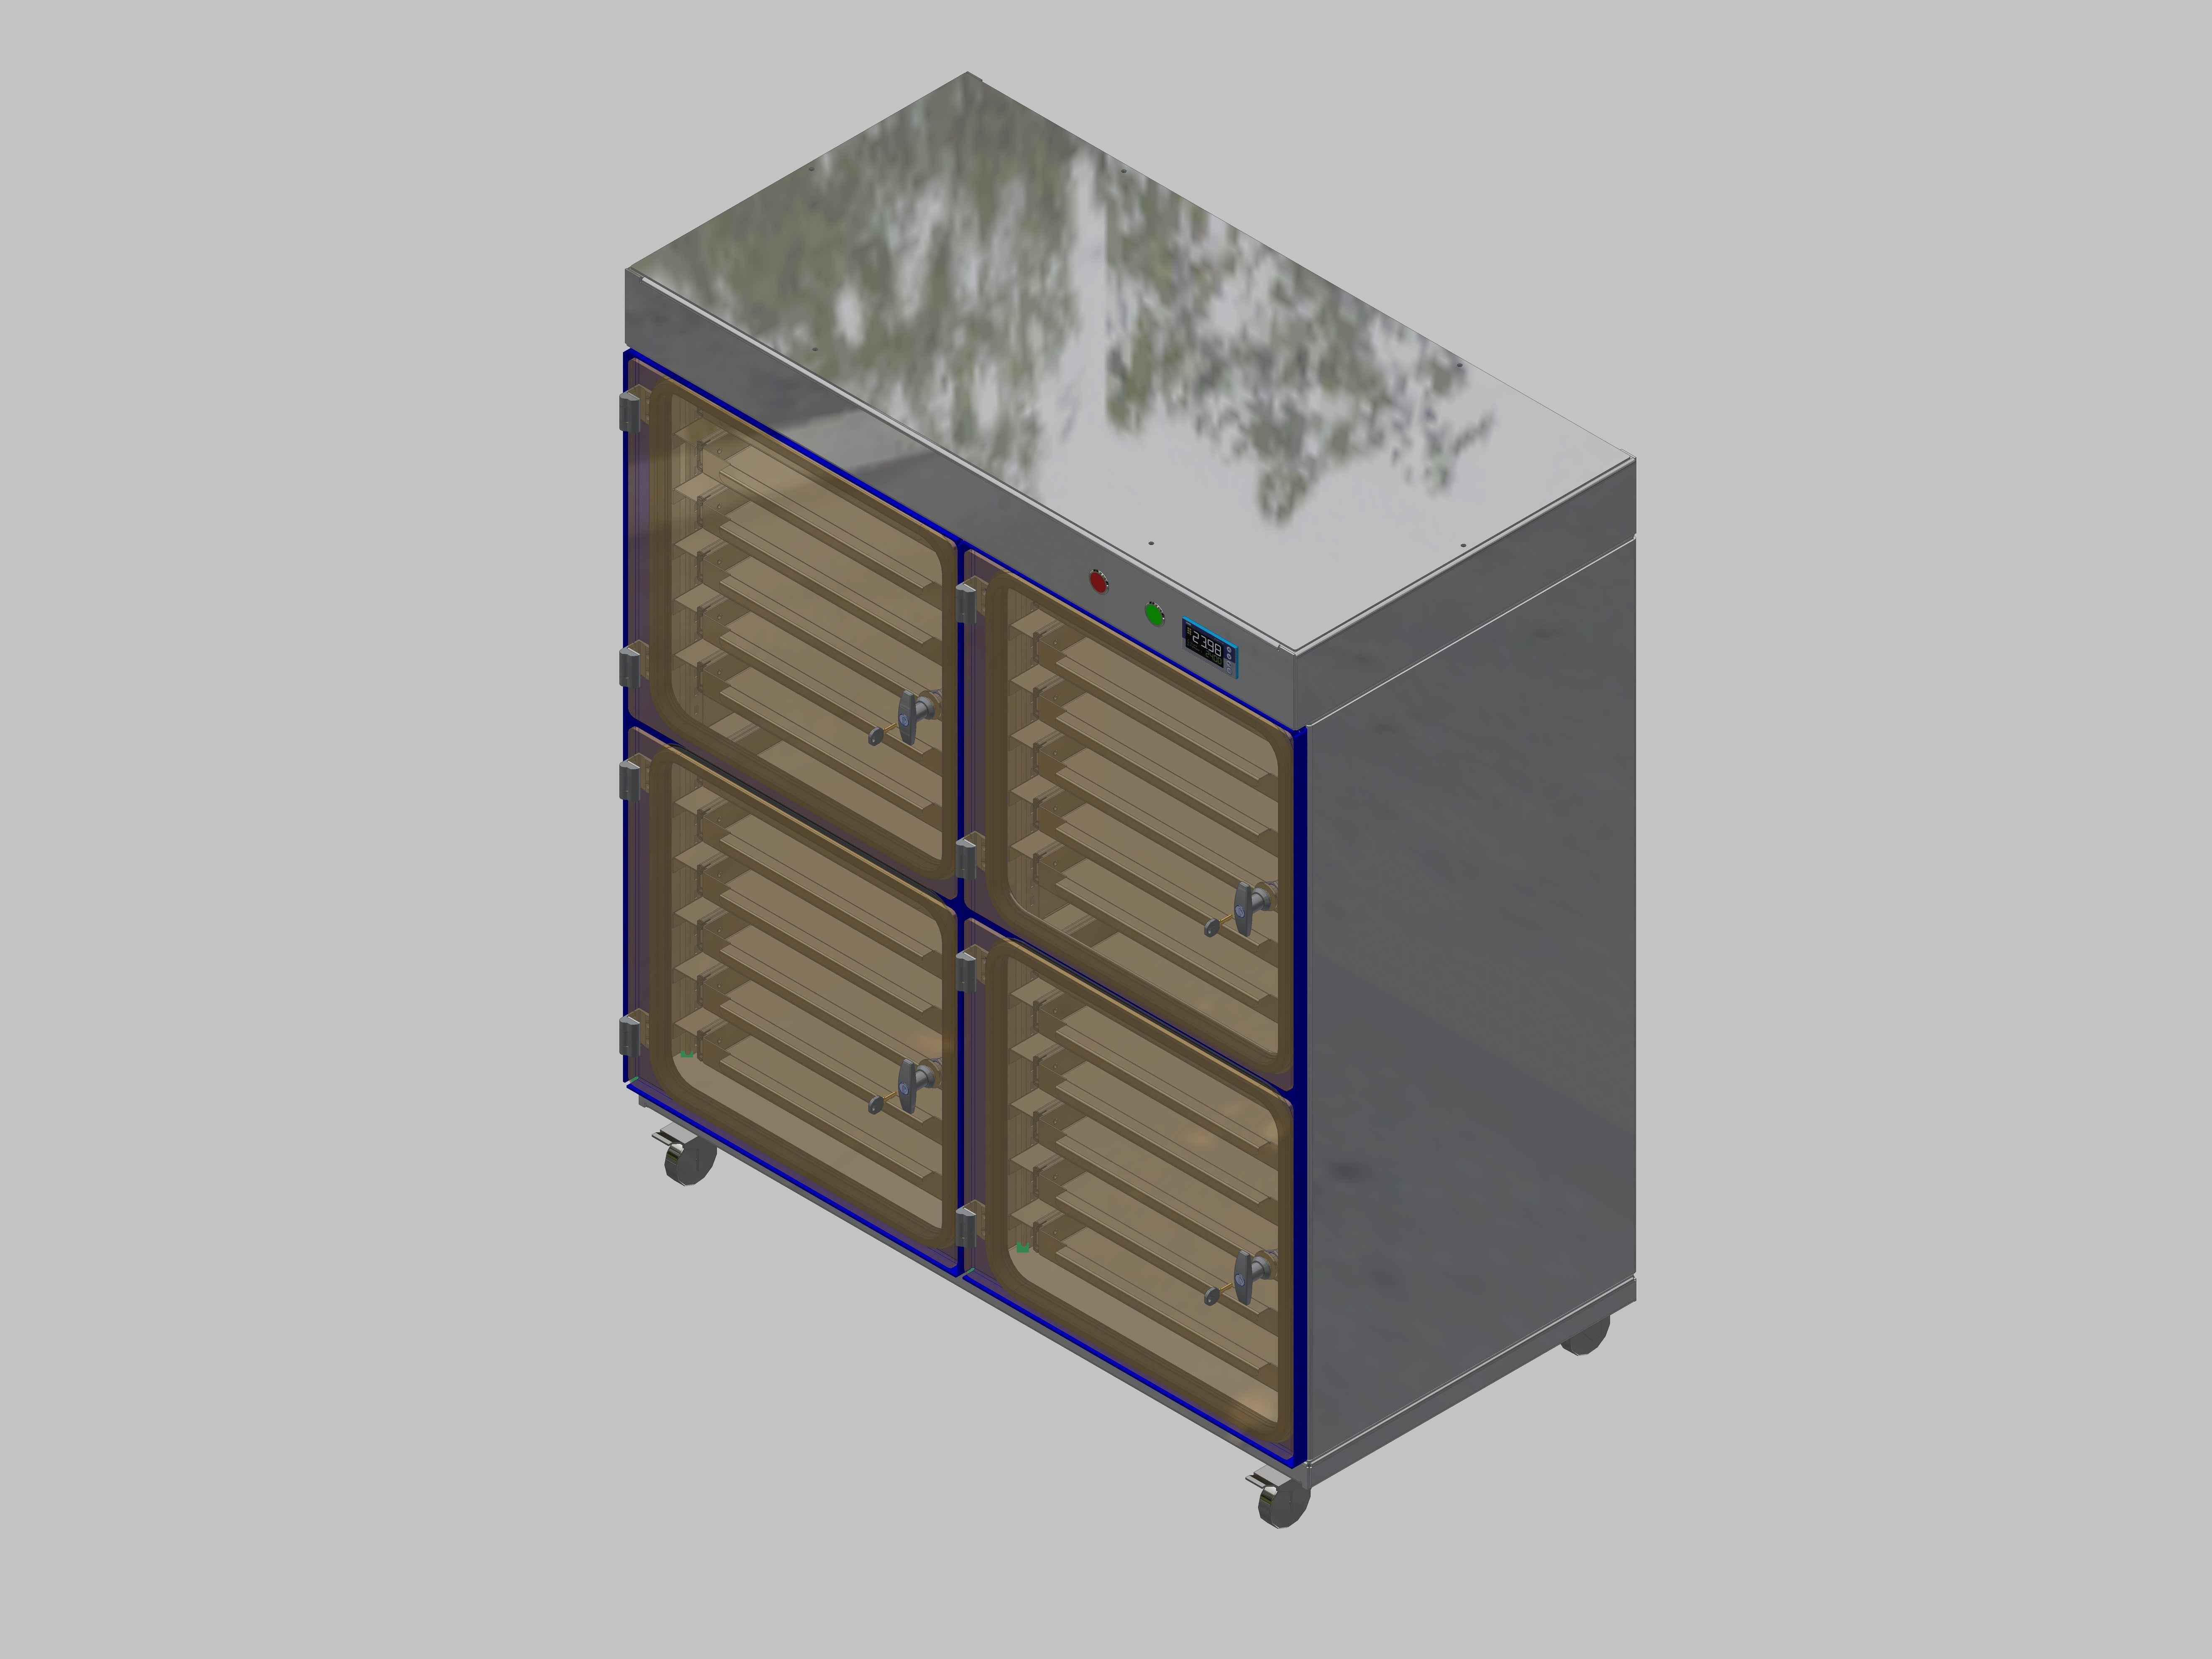 Dry storage cabinet-ITN-1200-4 with 6 drawers per compartment and base design with wheels